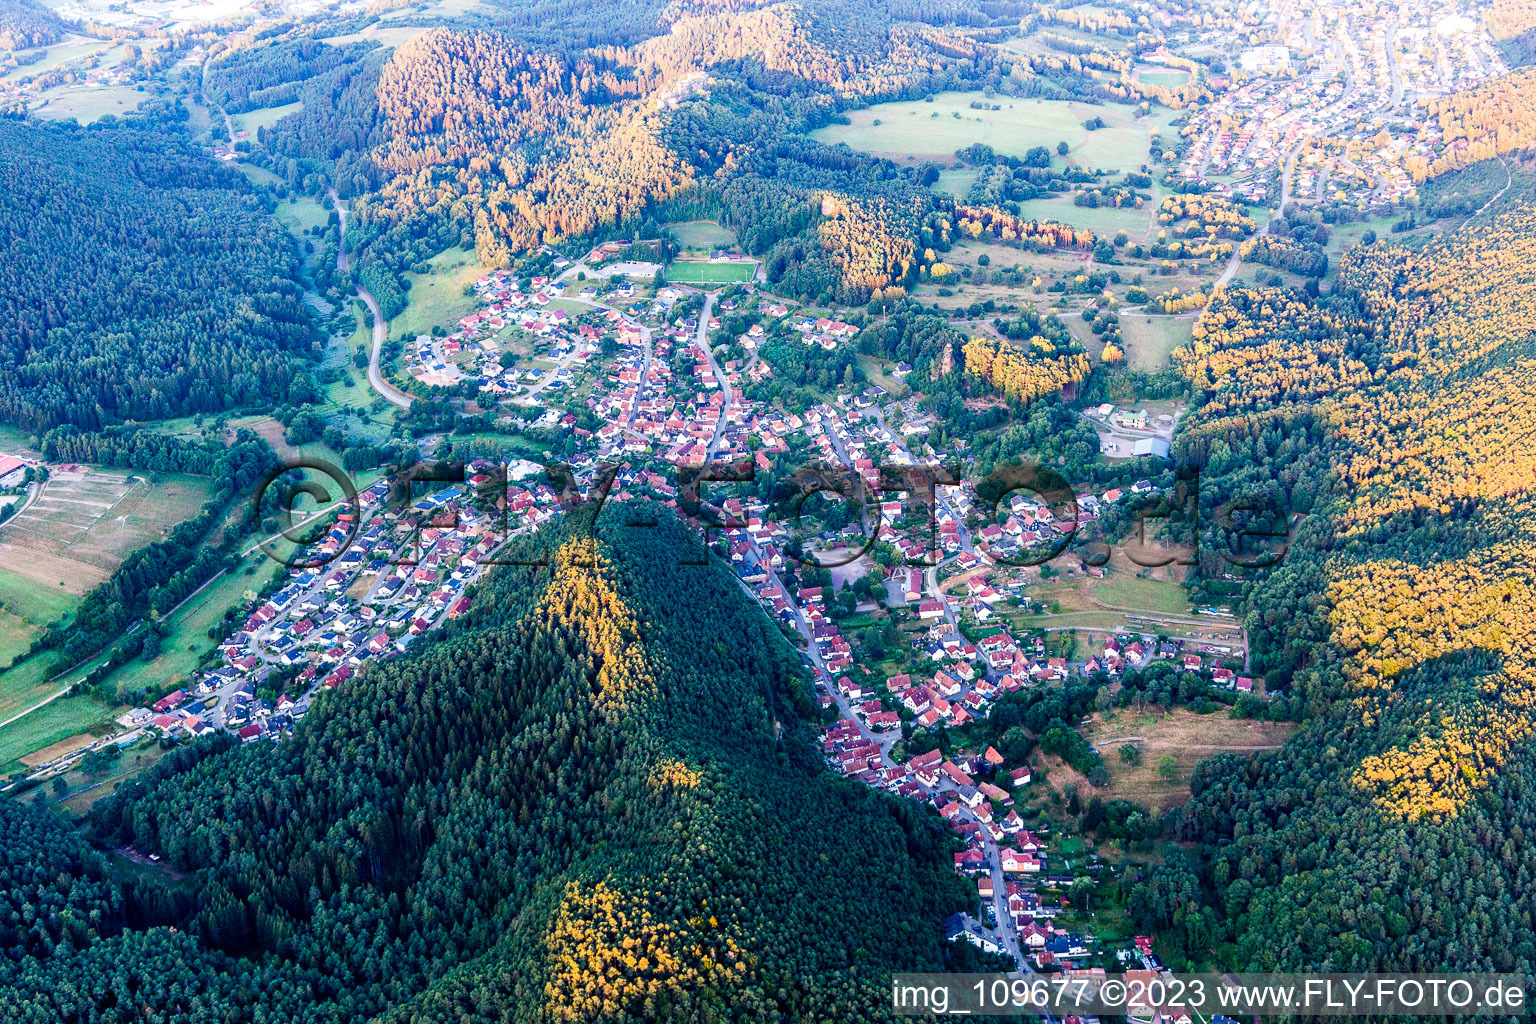 Erfweiler in the state Rhineland-Palatinate, Germany from above